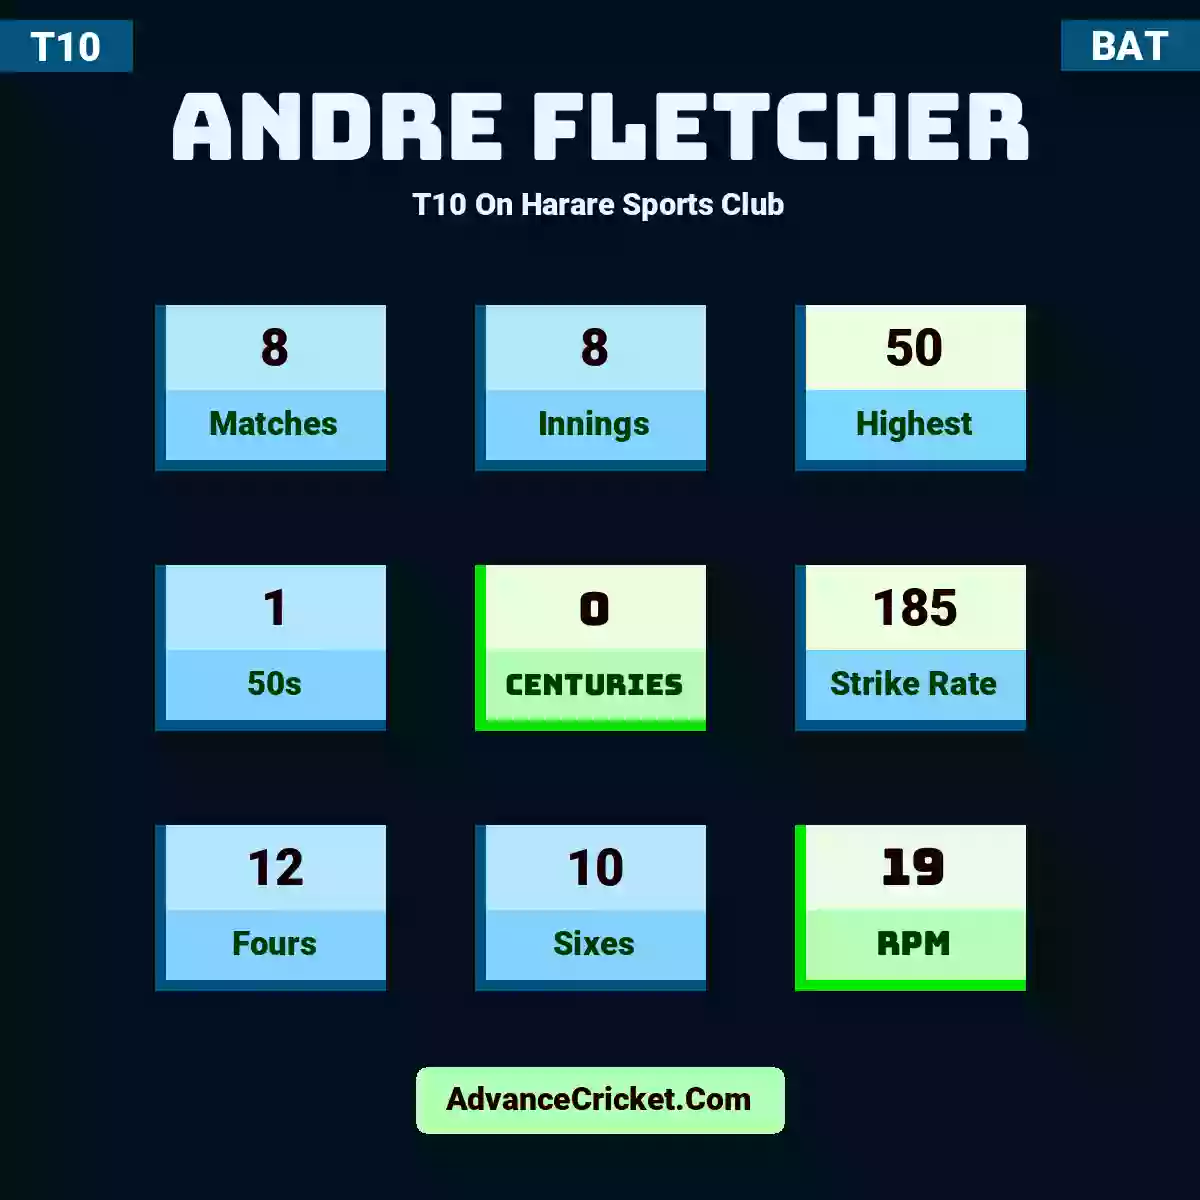 Andre Fletcher T10  On Harare Sports Club, Andre Fletcher played 8 matches, scored 50 runs as highest, 1 half-centuries, and 0 centuries, with a strike rate of 185. A.Fletcher hit 12 fours and 10 sixes, with an RPM of 19.